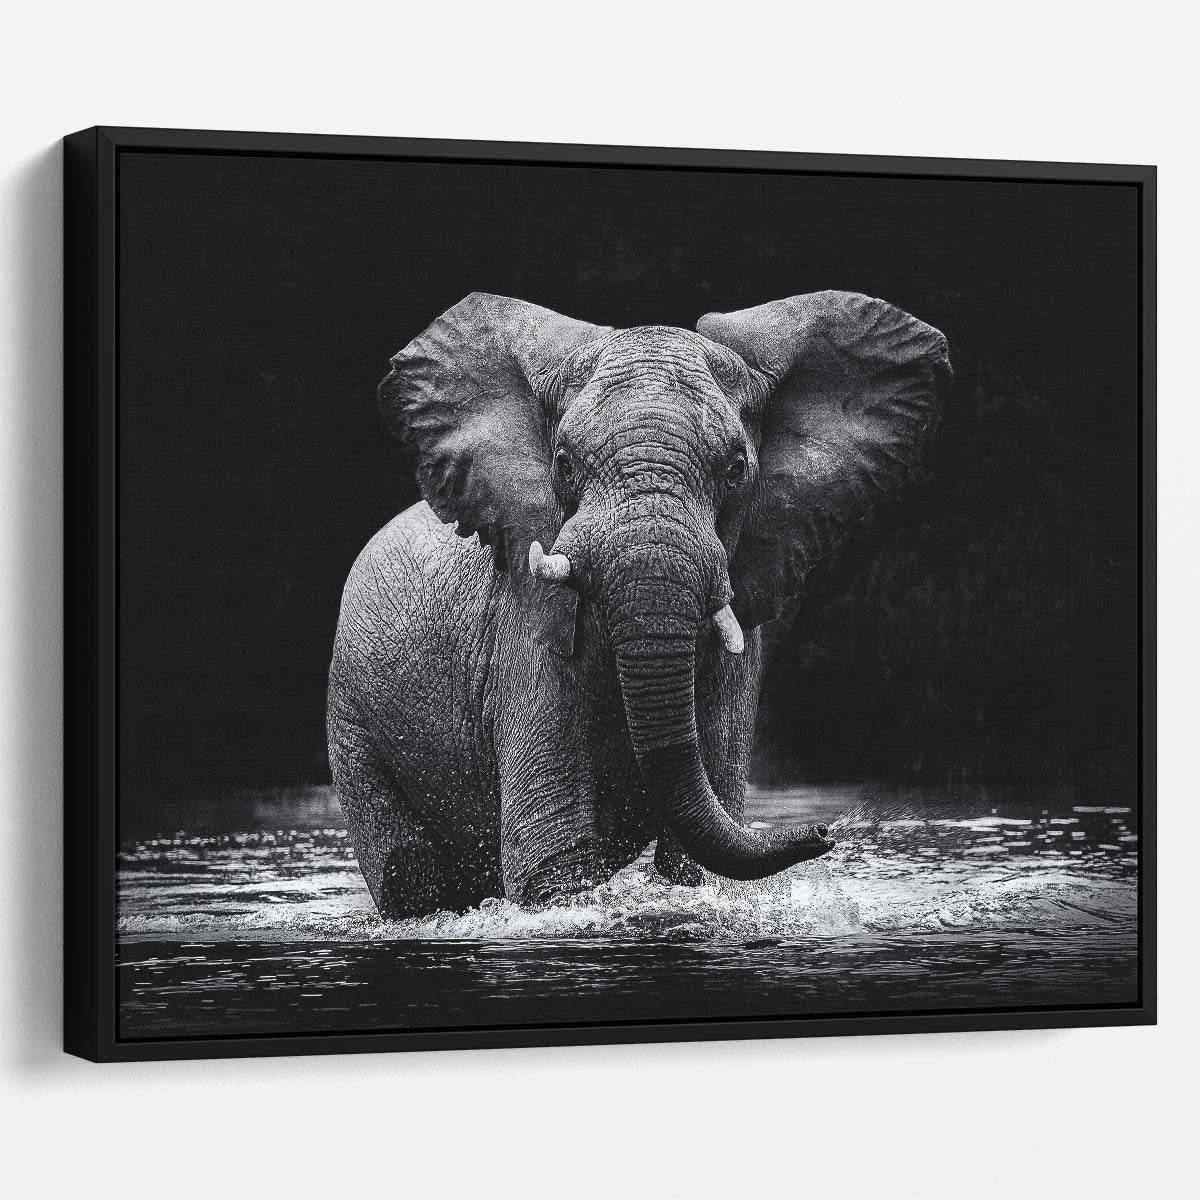 Monochrome Elephant Swimming Kafue River Wall Art by Luxuriance Designs. Made in USA.